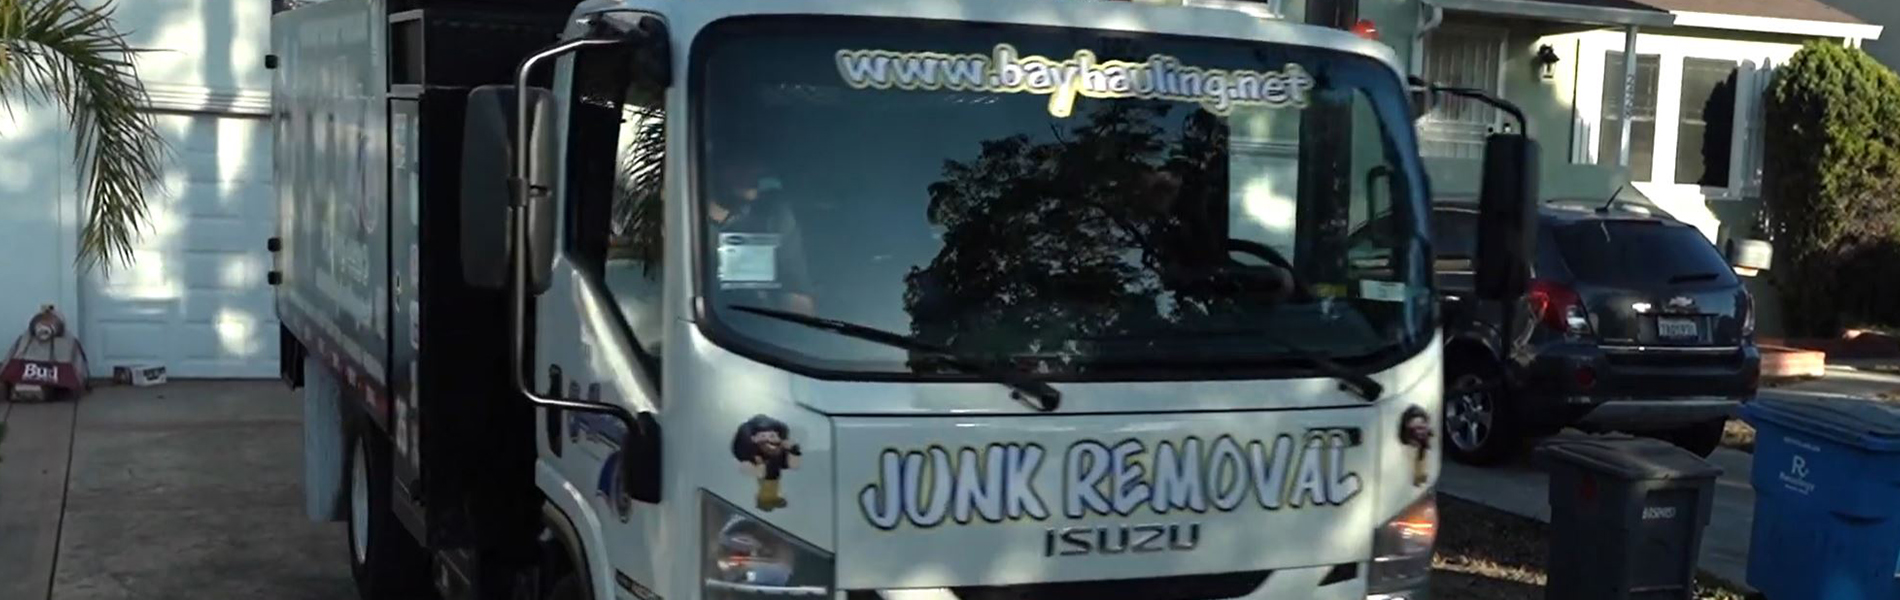 Best Junk Removal Company 2